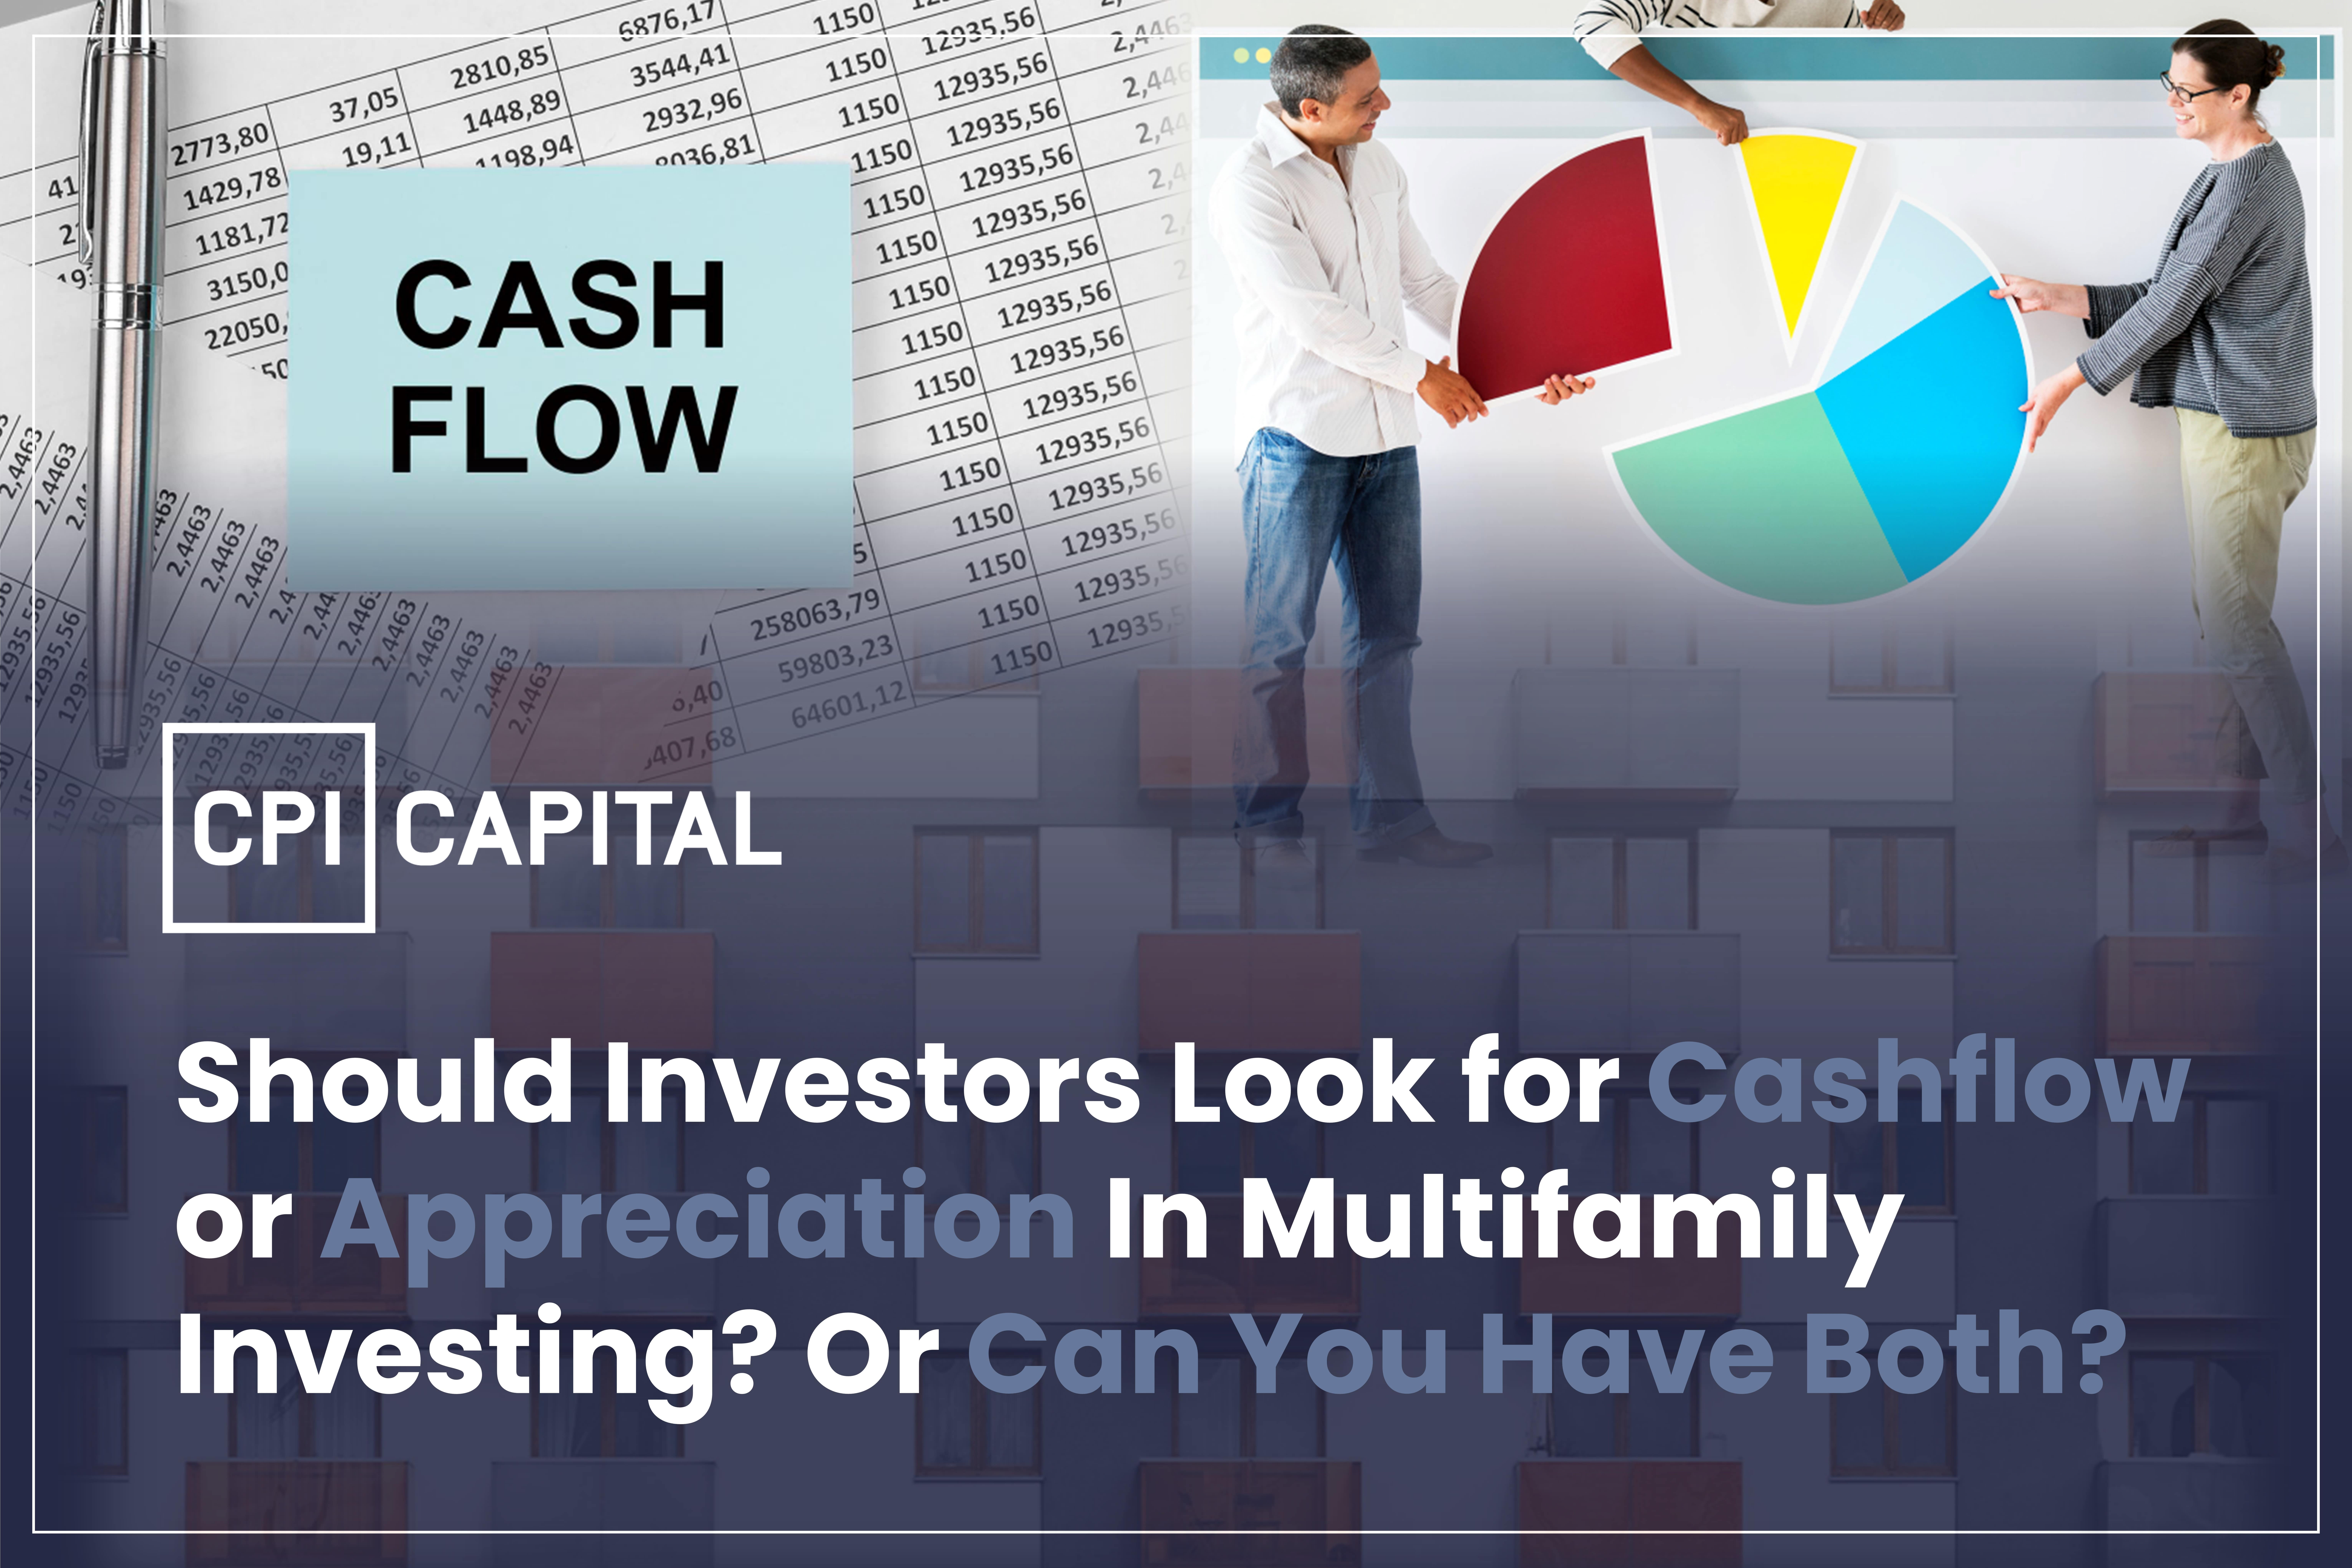 Should Investors Look for Cashflow or Appreciation In Multifamily Investing? Or Can You Have Both?